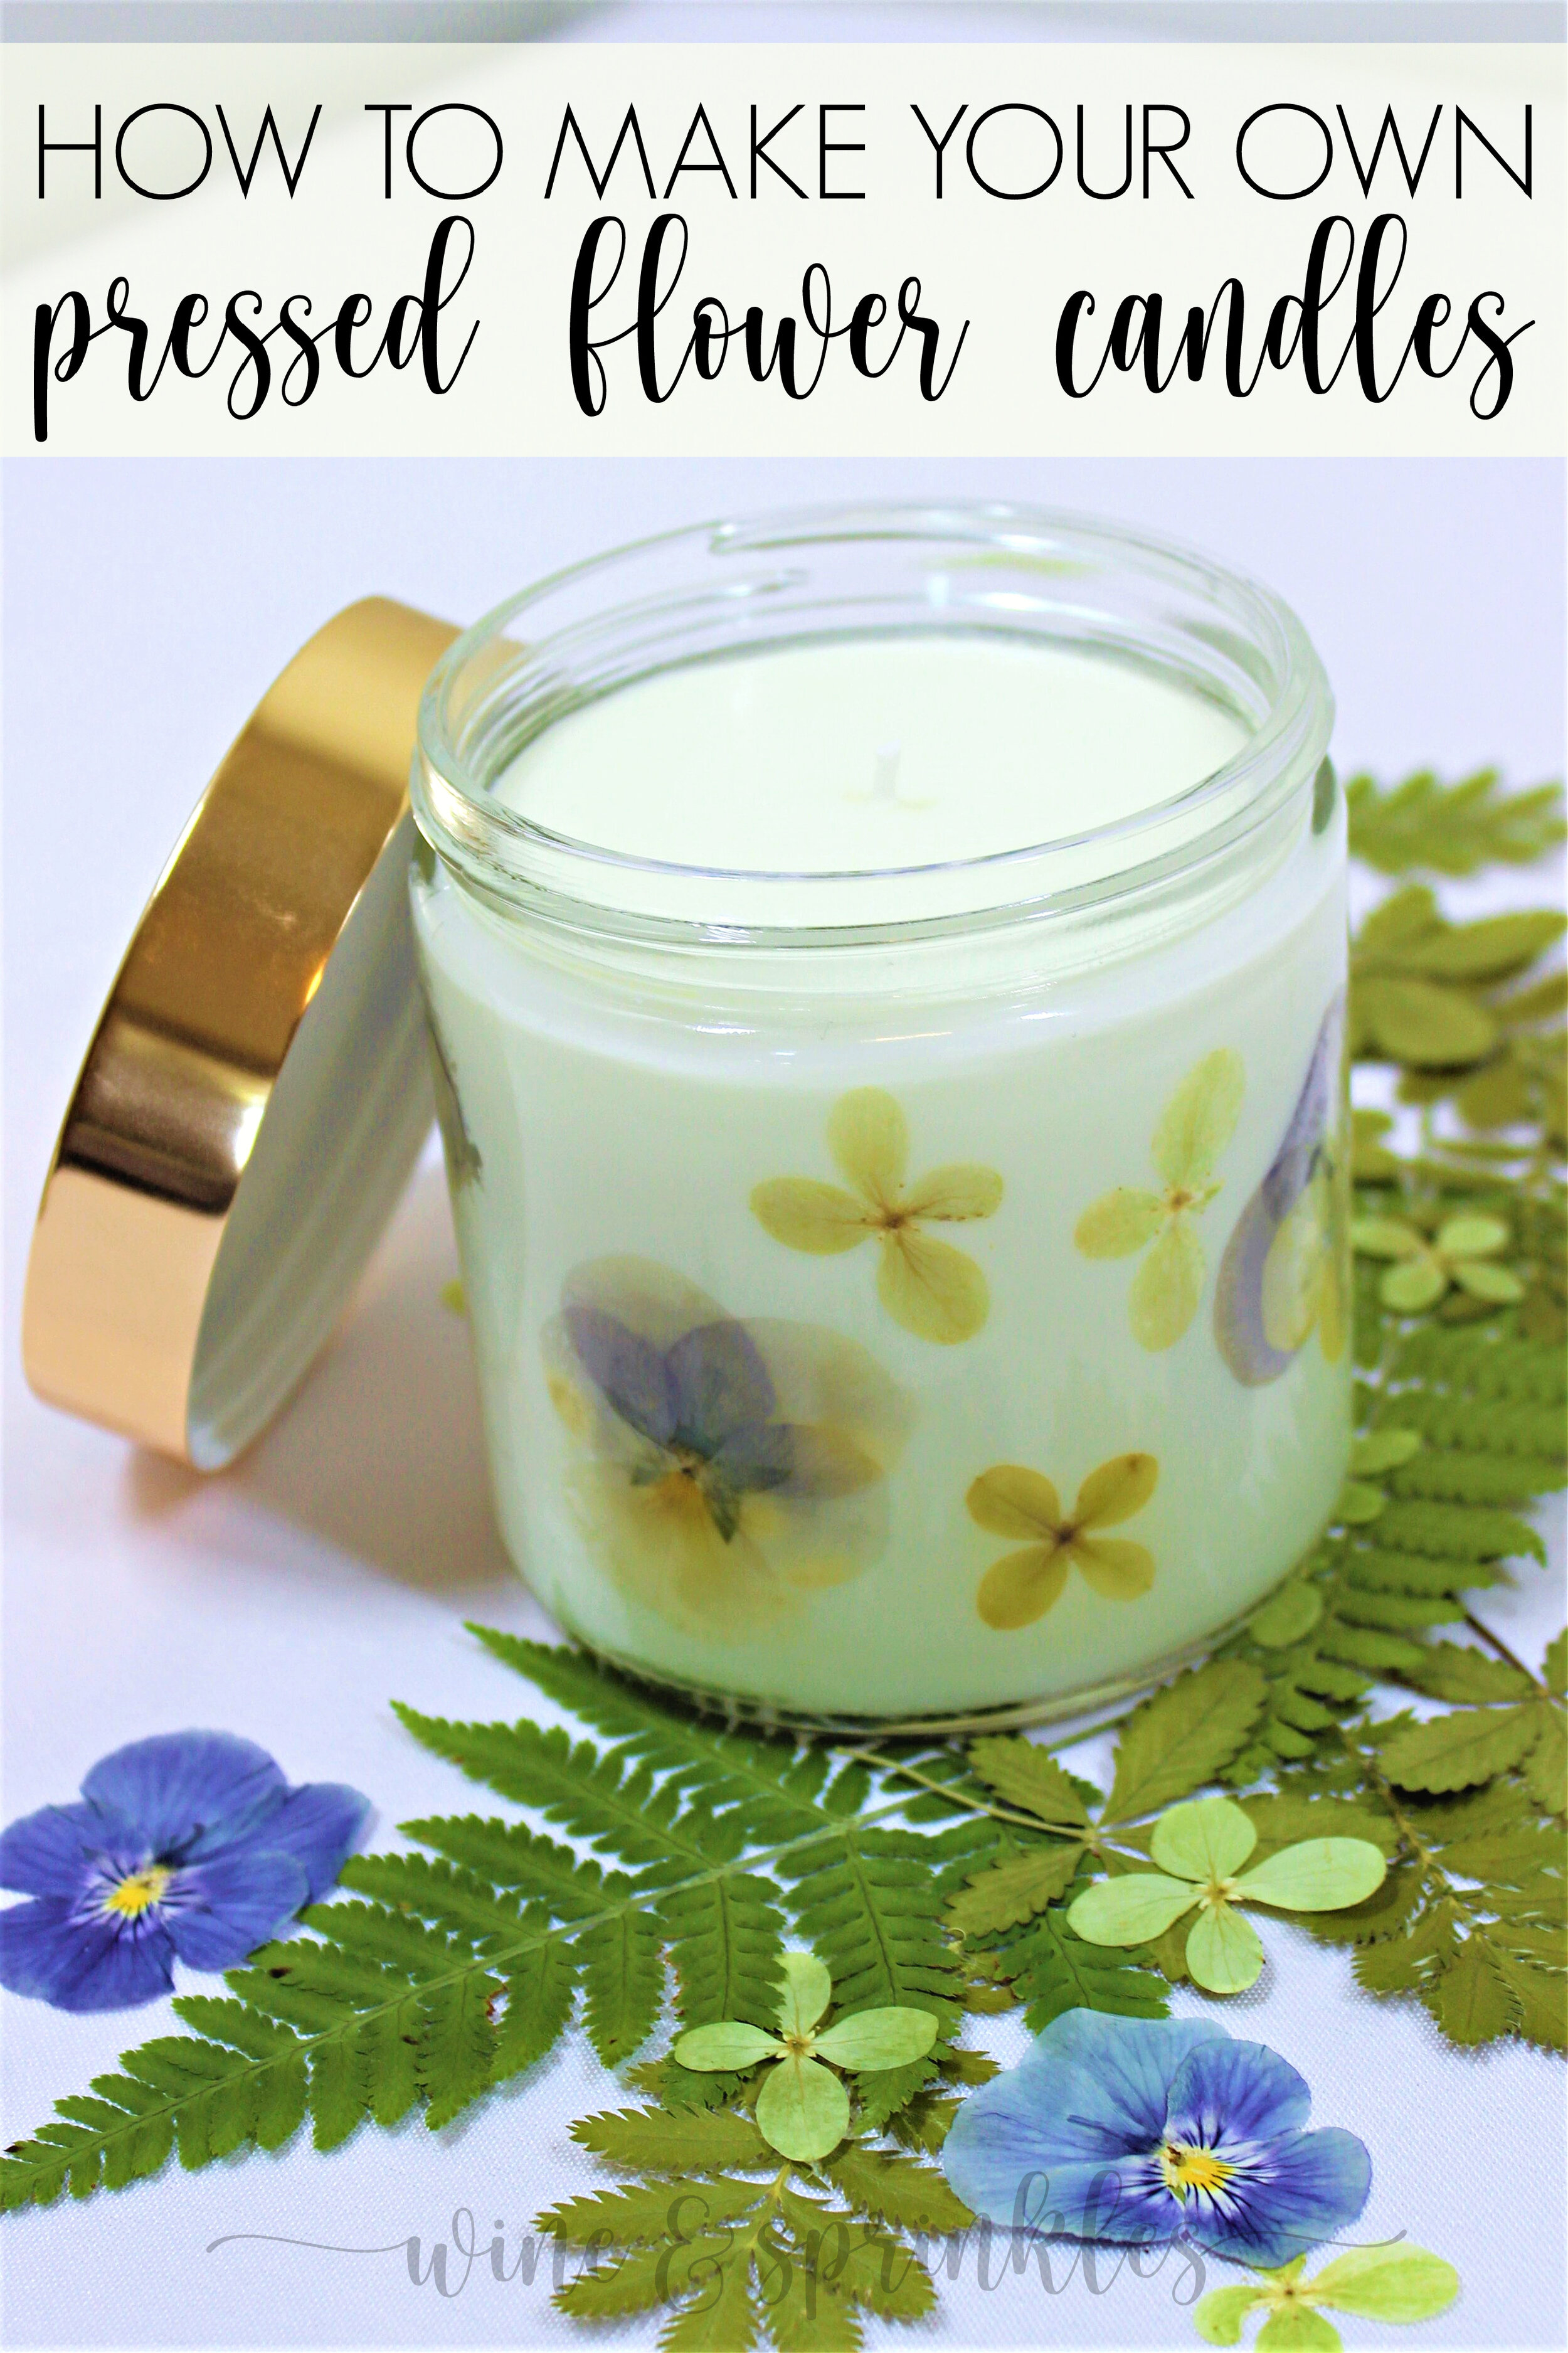 How To Make Dried Flower Candles, Recipe